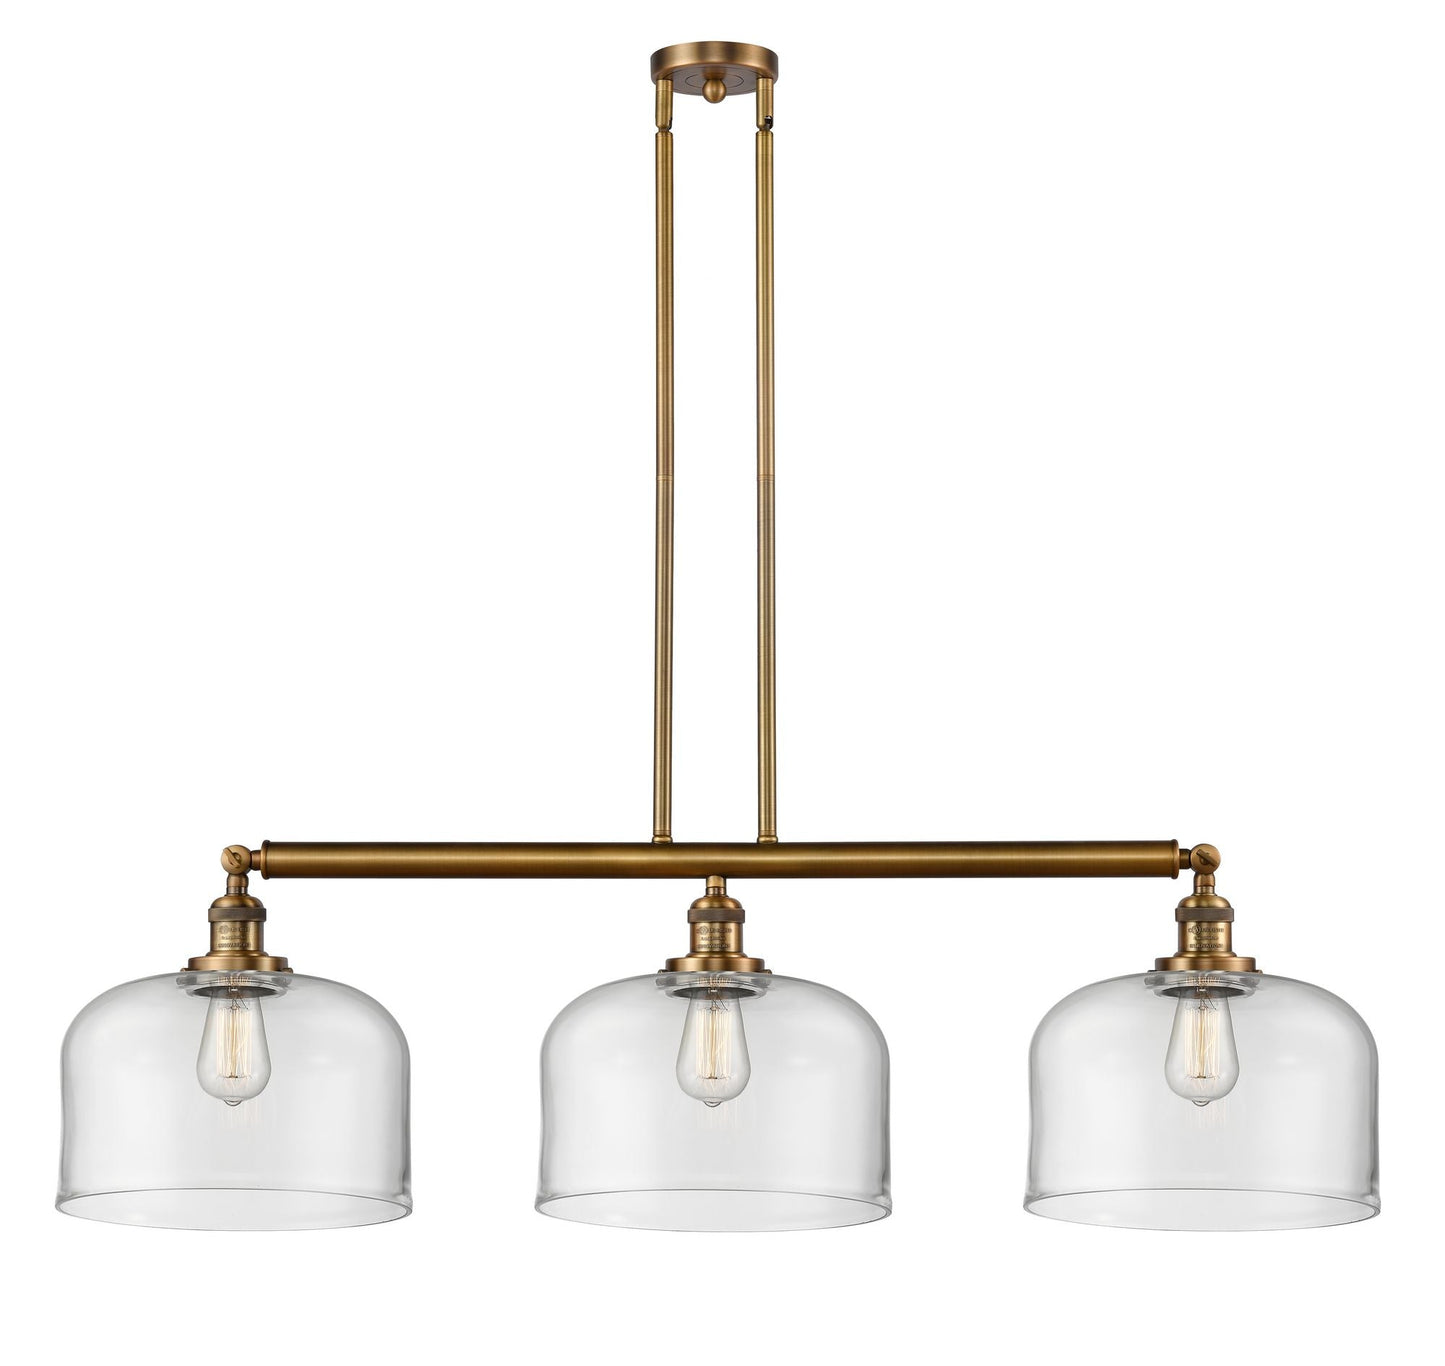 213-BB-G72-L 3-Light 42" Brushed Brass Island Light - Clear X-Large Bell Glass - LED Bulb - Dimmensions: 42 x 12 x 13<br>Minimum Height : 22.25<br>Maximum Height : 46.25 - Sloped Ceiling Compatible: Yes